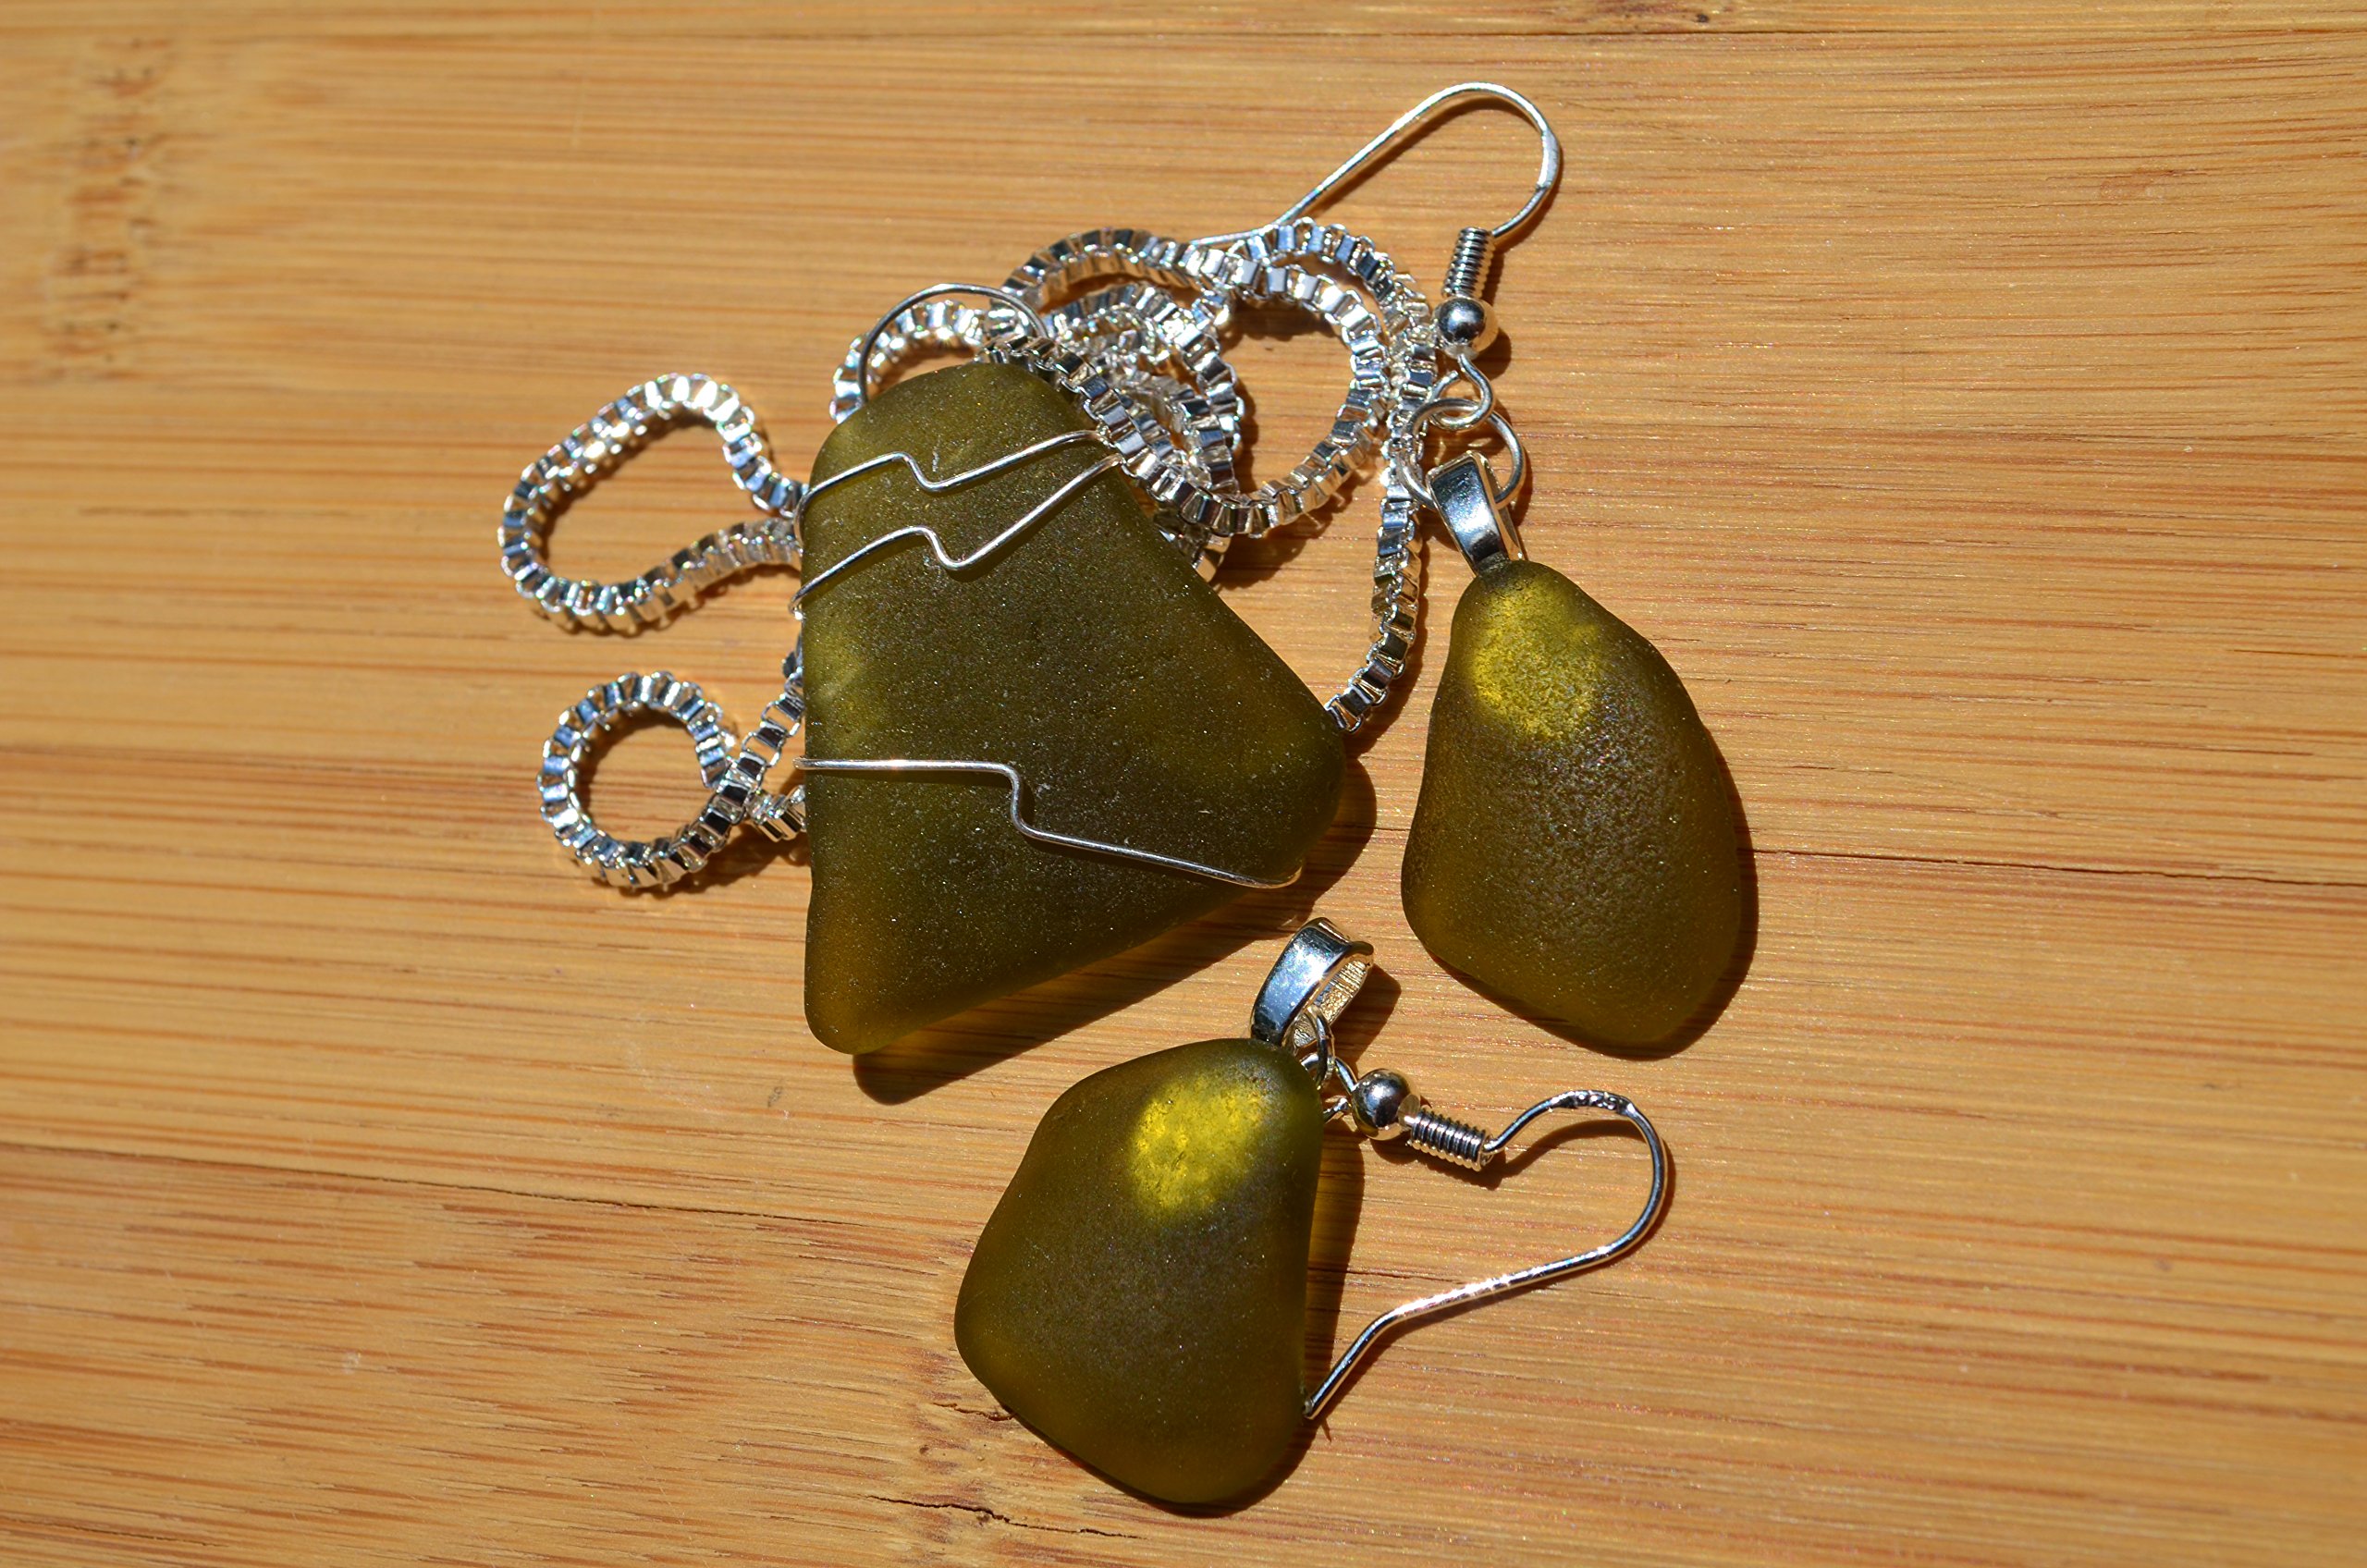 Genuine Olive Green Sea Glass Sterling Silver Earrings and Necklace Set